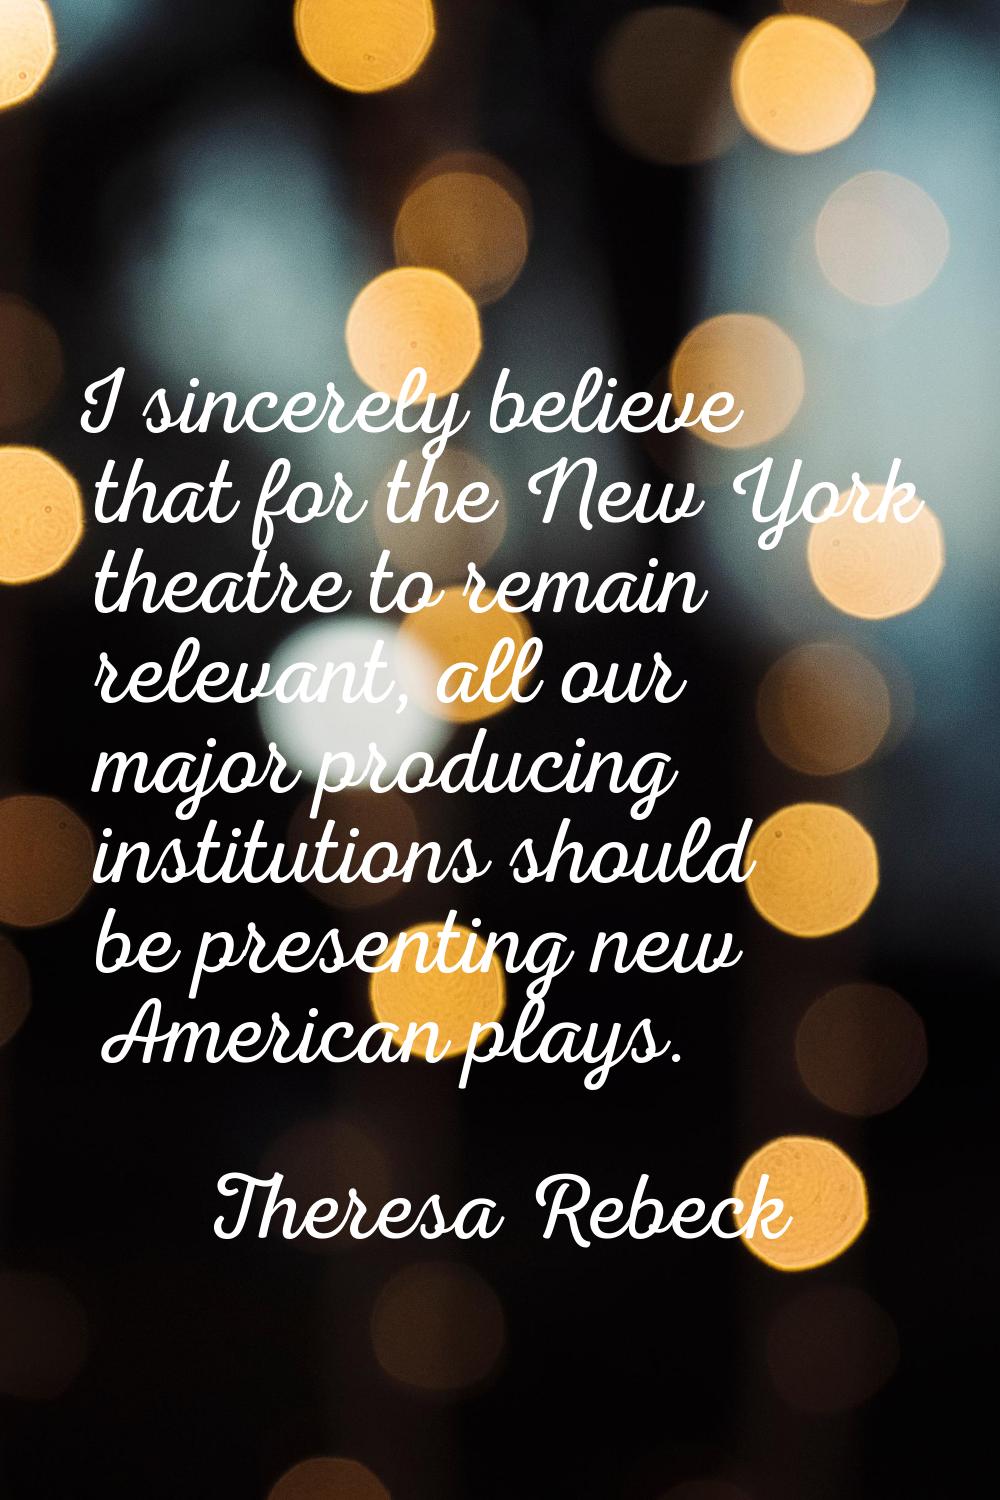 I sincerely believe that for the New York theatre to remain relevant, all our major producing insti